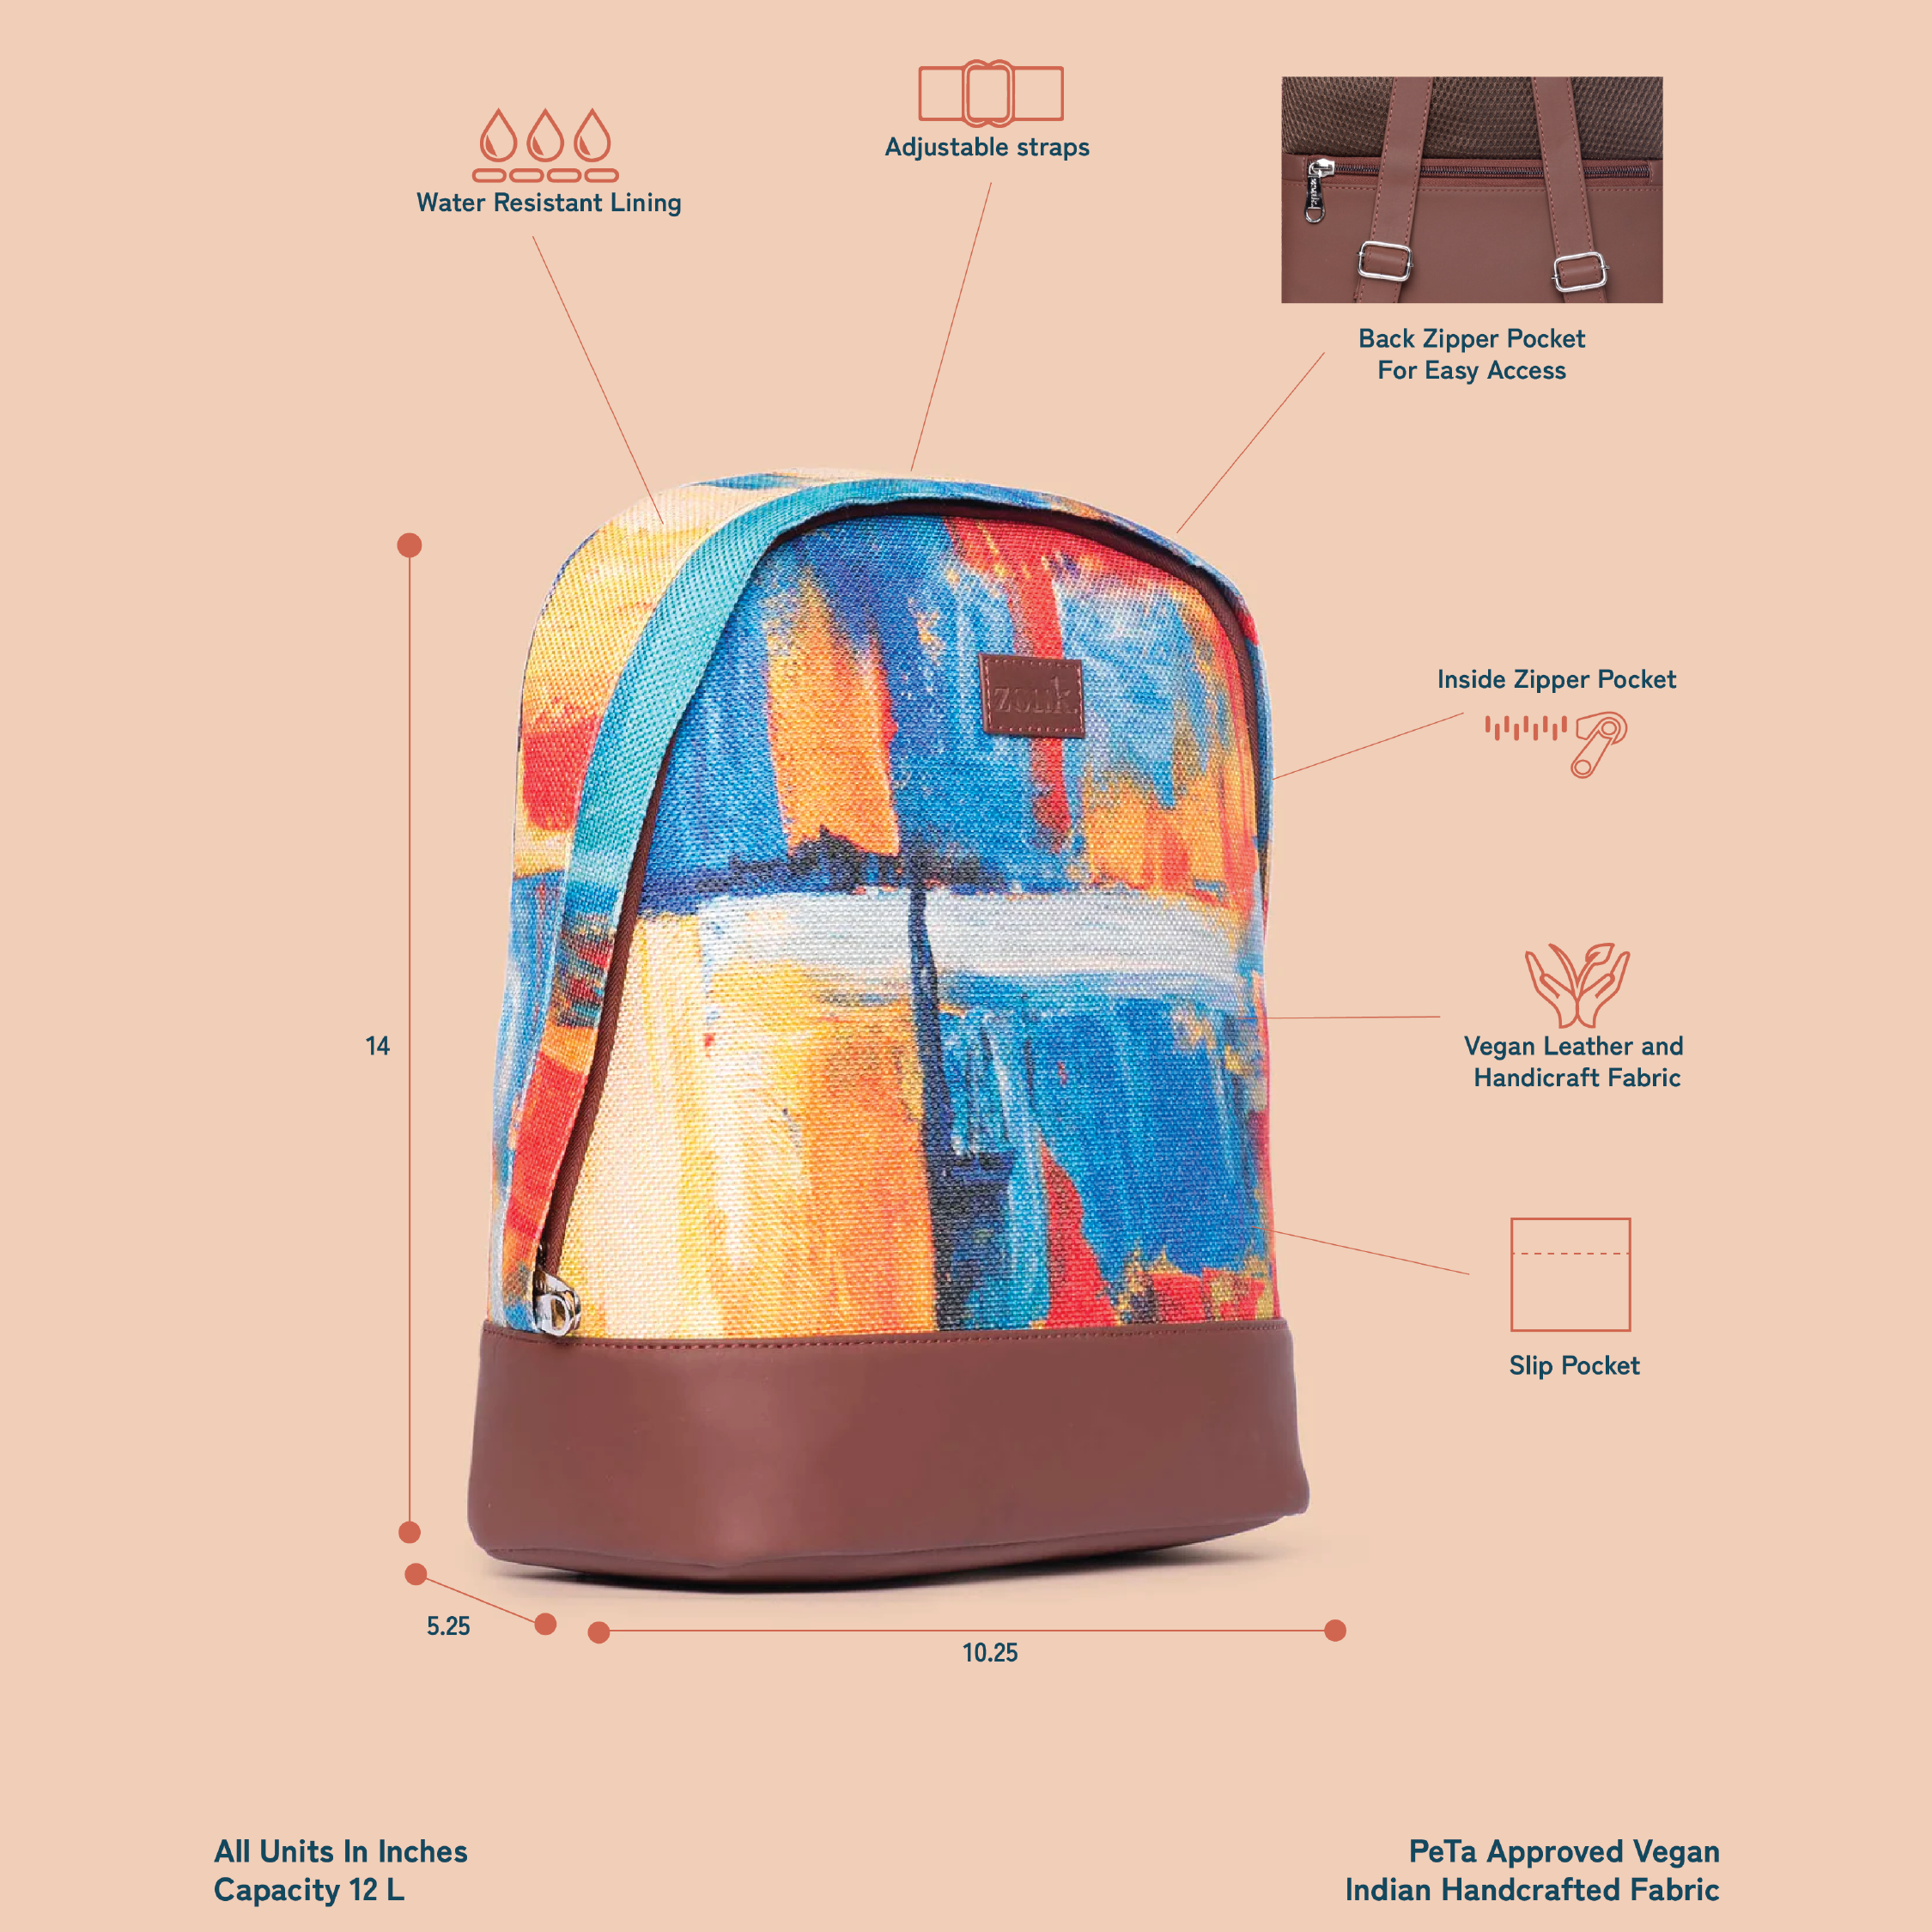 Abstract Amaze Dome Daypack